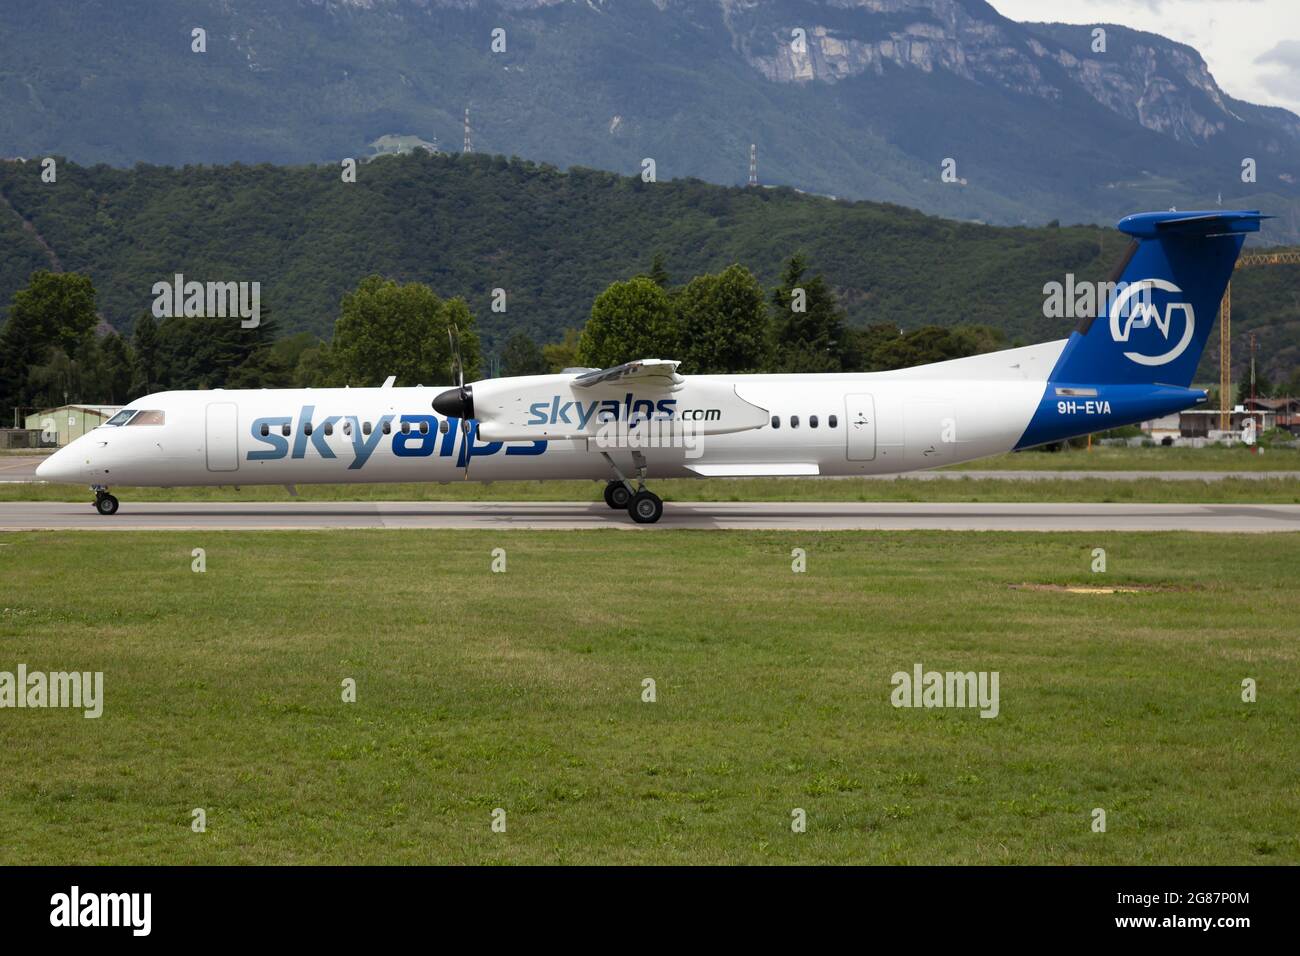 Bolzano, Italy. 17th July, 2021. The second Sky Alps (Luxwing) Bombardier Dash 8-400 taxiing at Bolzano airport coming from Olbia as a summer charter flight. (Photo by Fabrizio Gandolfo/SOPA Images/Sipa USA) Credit: Sipa USA/Alamy Live News Stock Photo